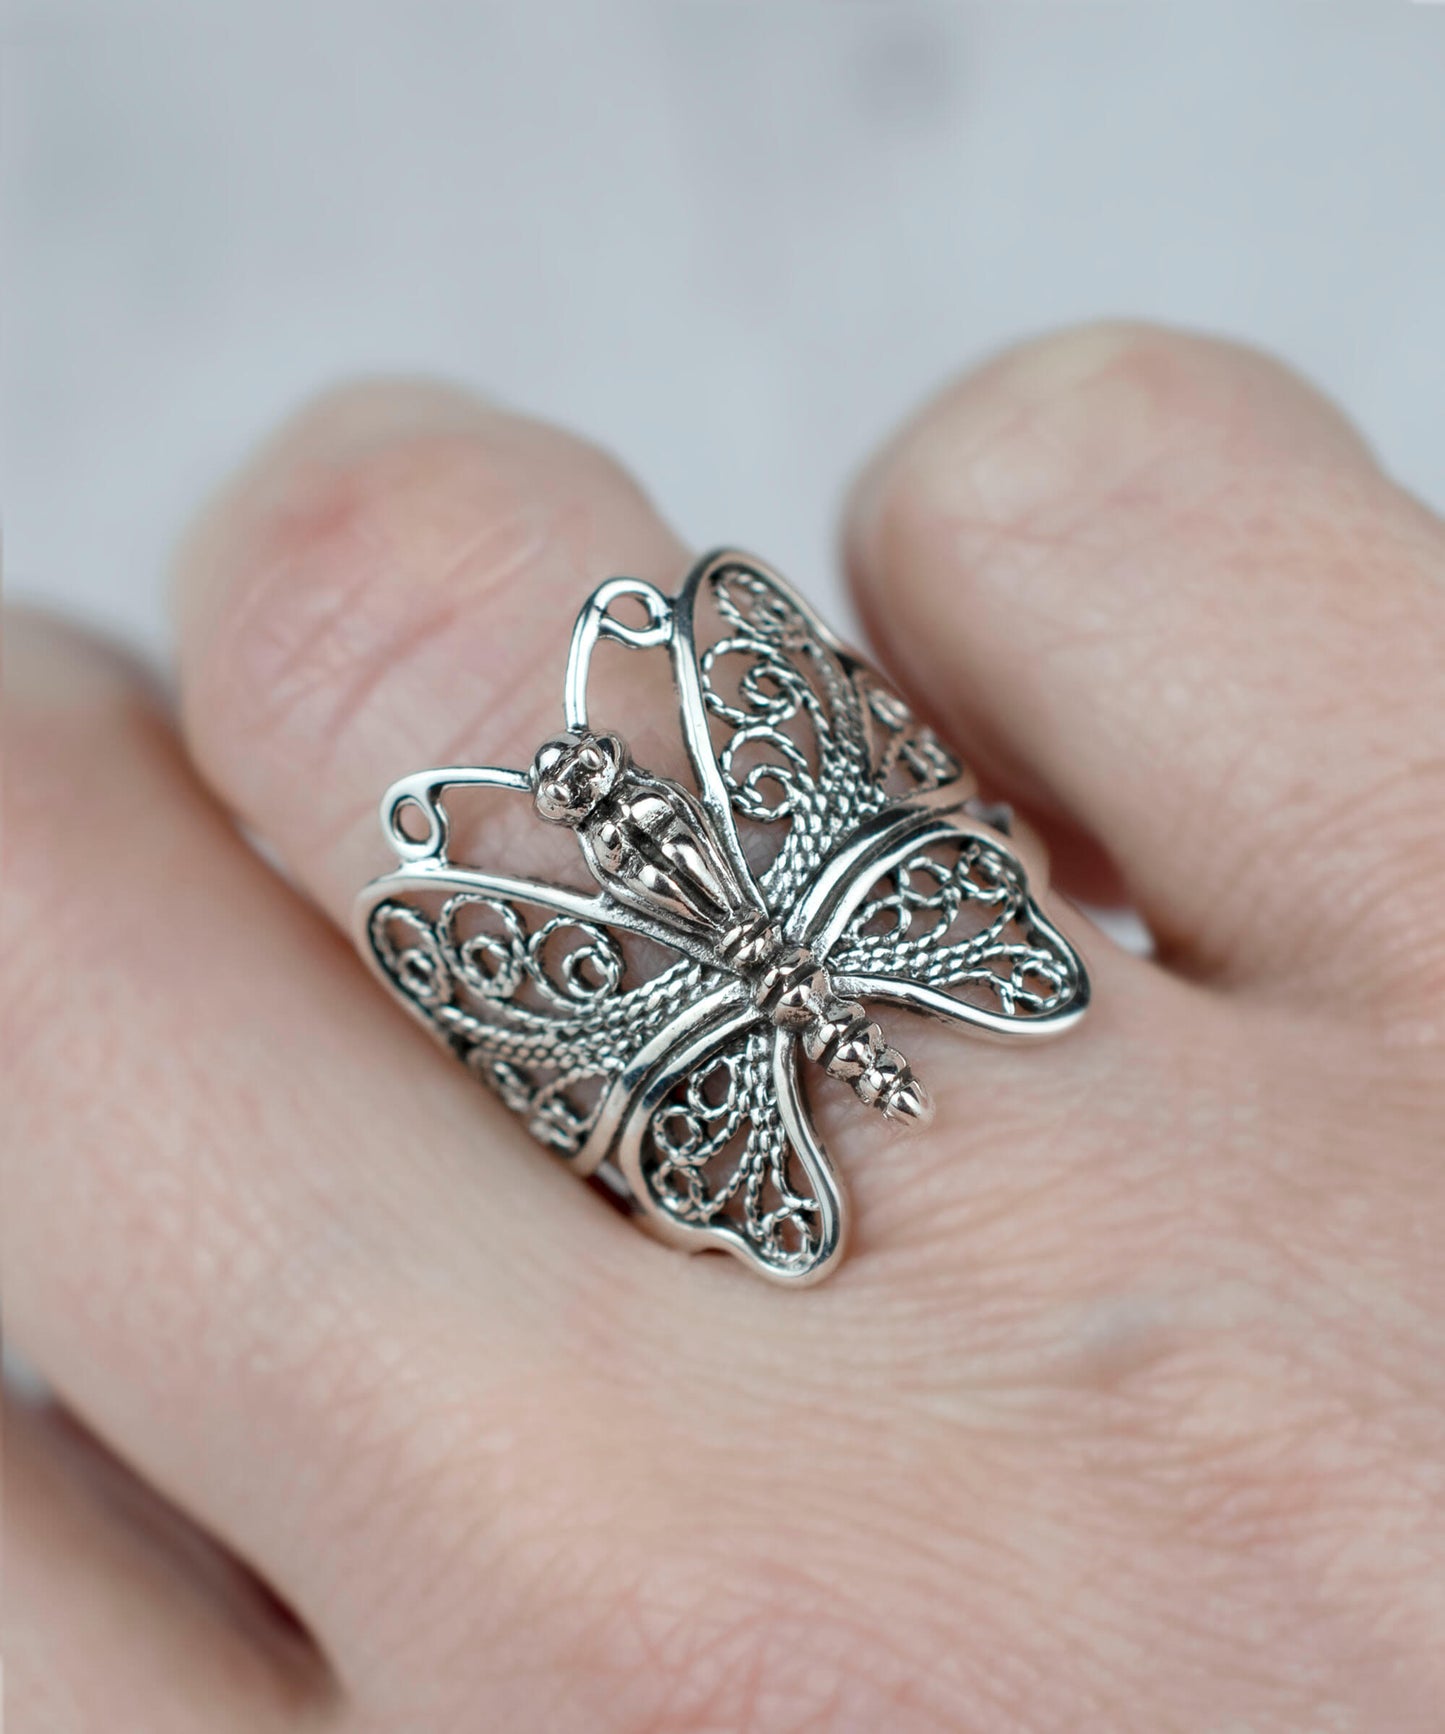 Filigree Art Butterfly Design Woman Silver Statement Ring